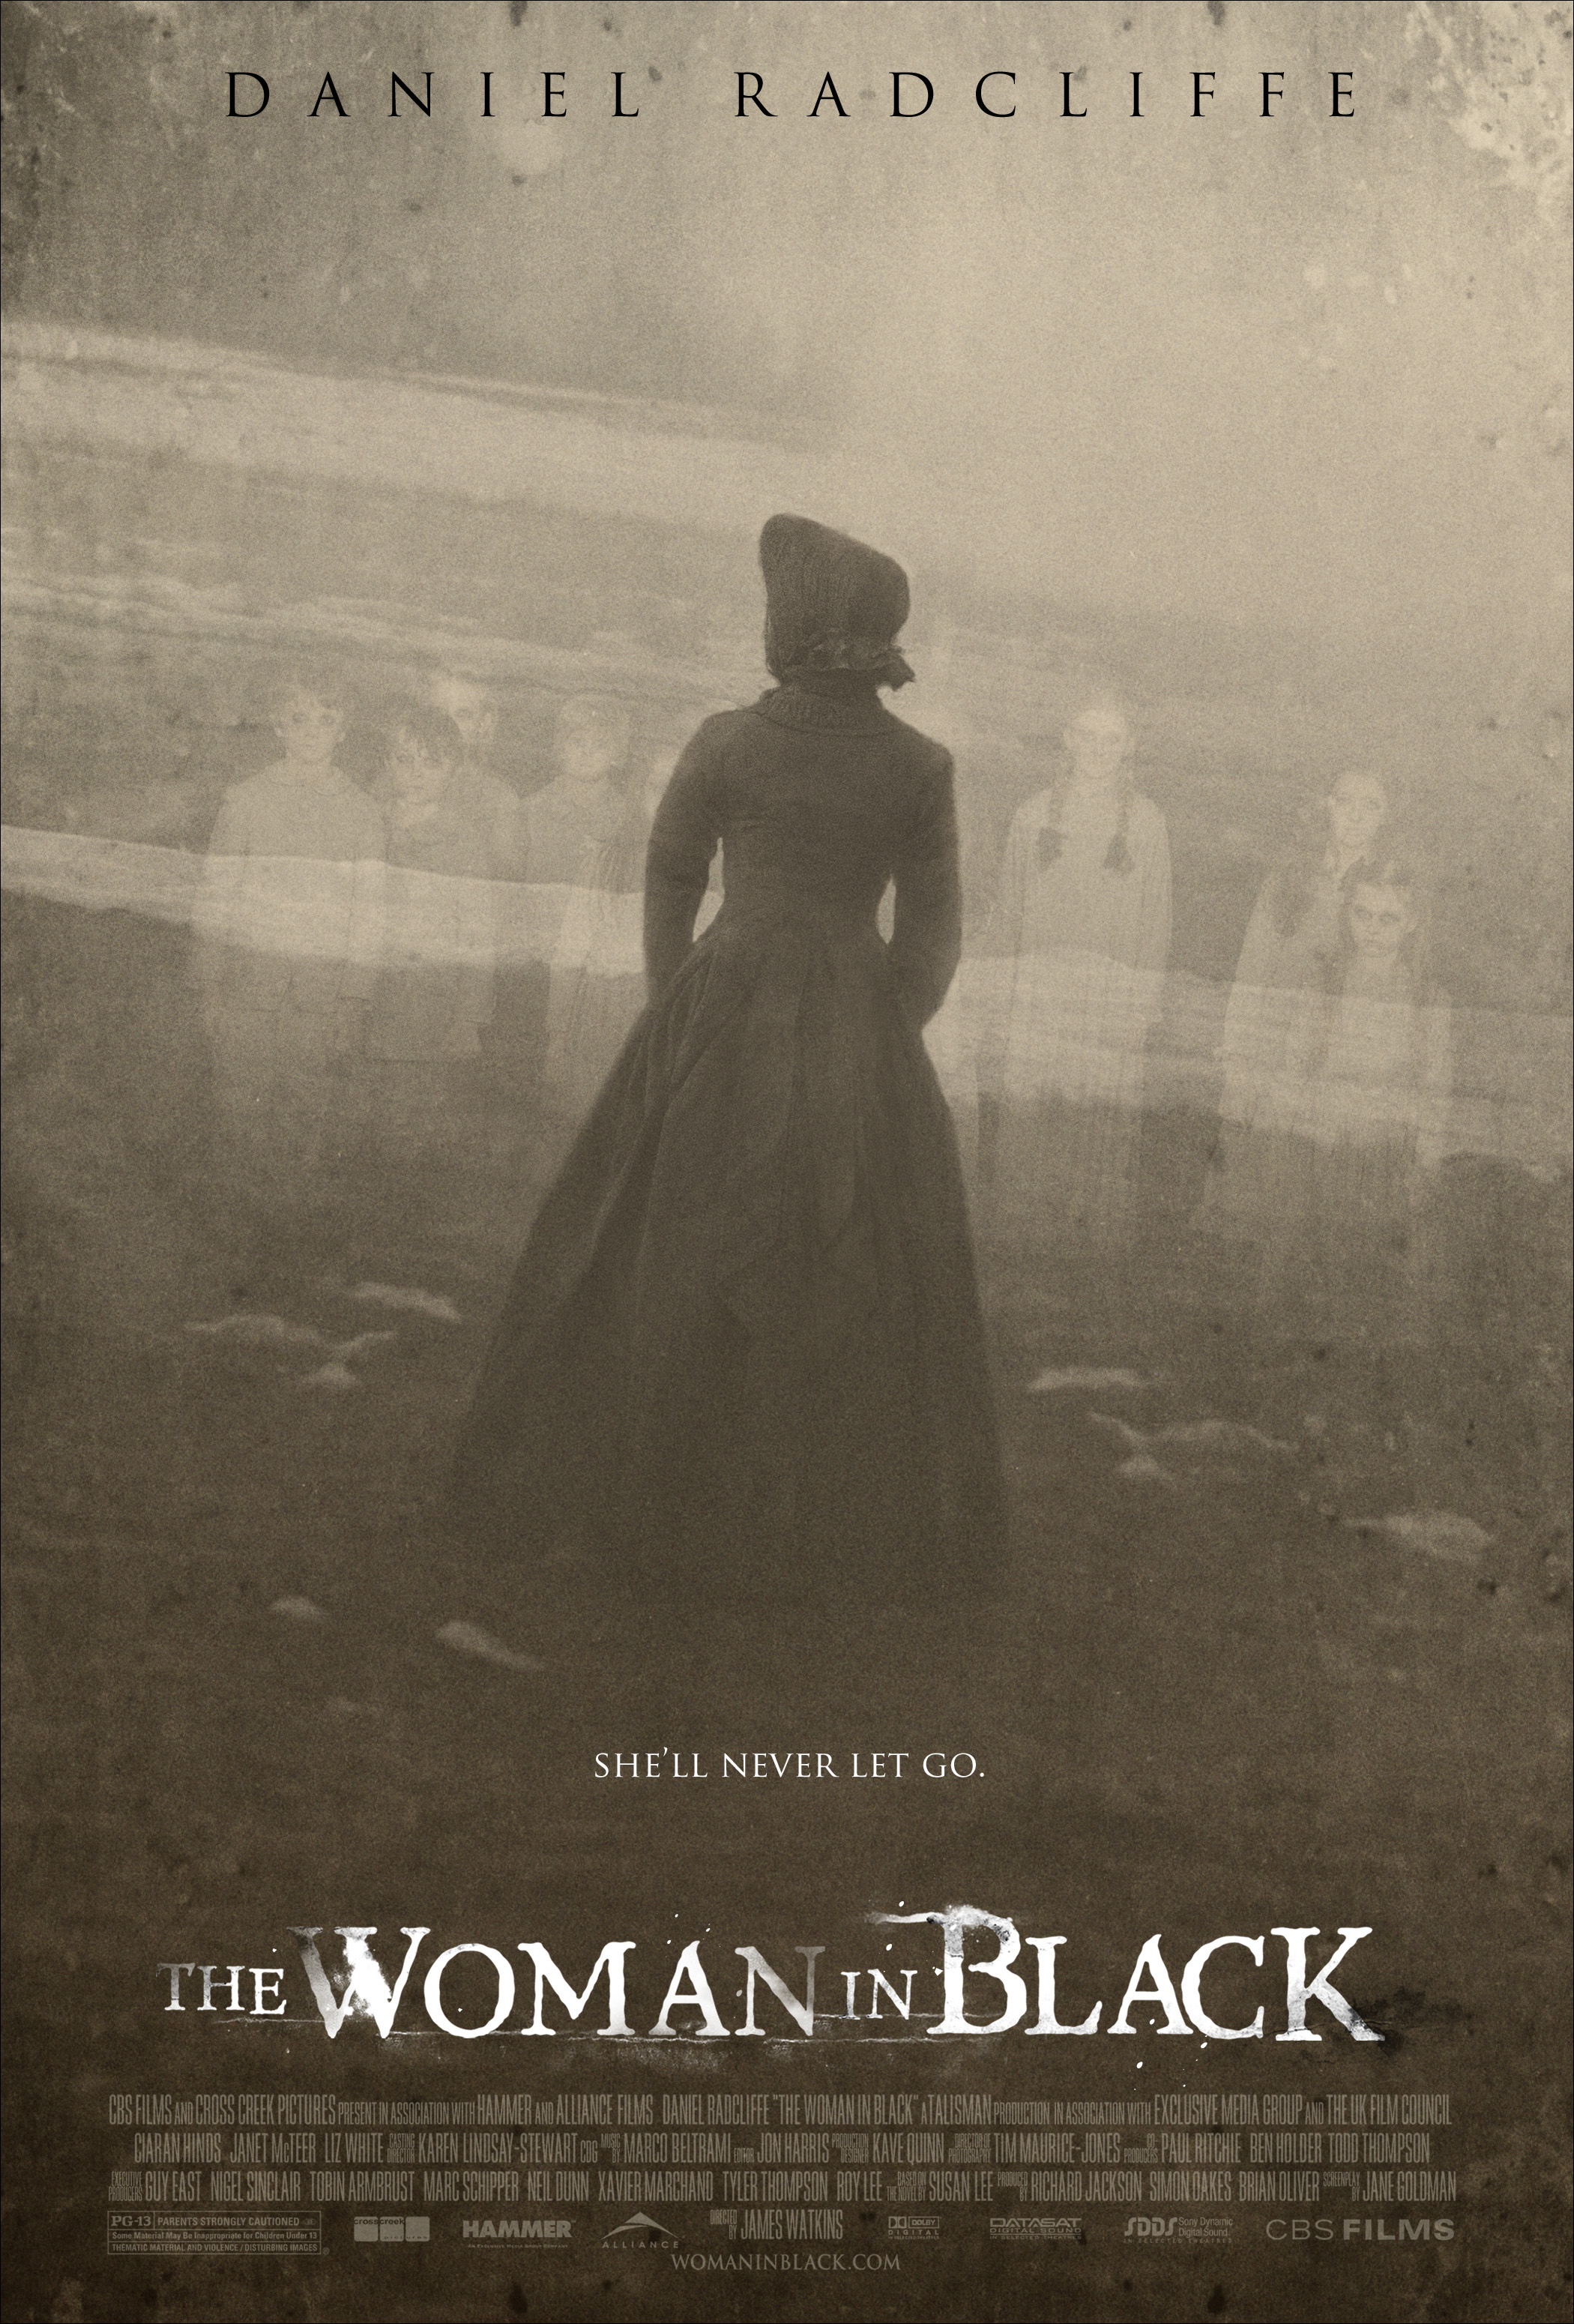 The Woman In Black (2012): A classic ghost story with a twist